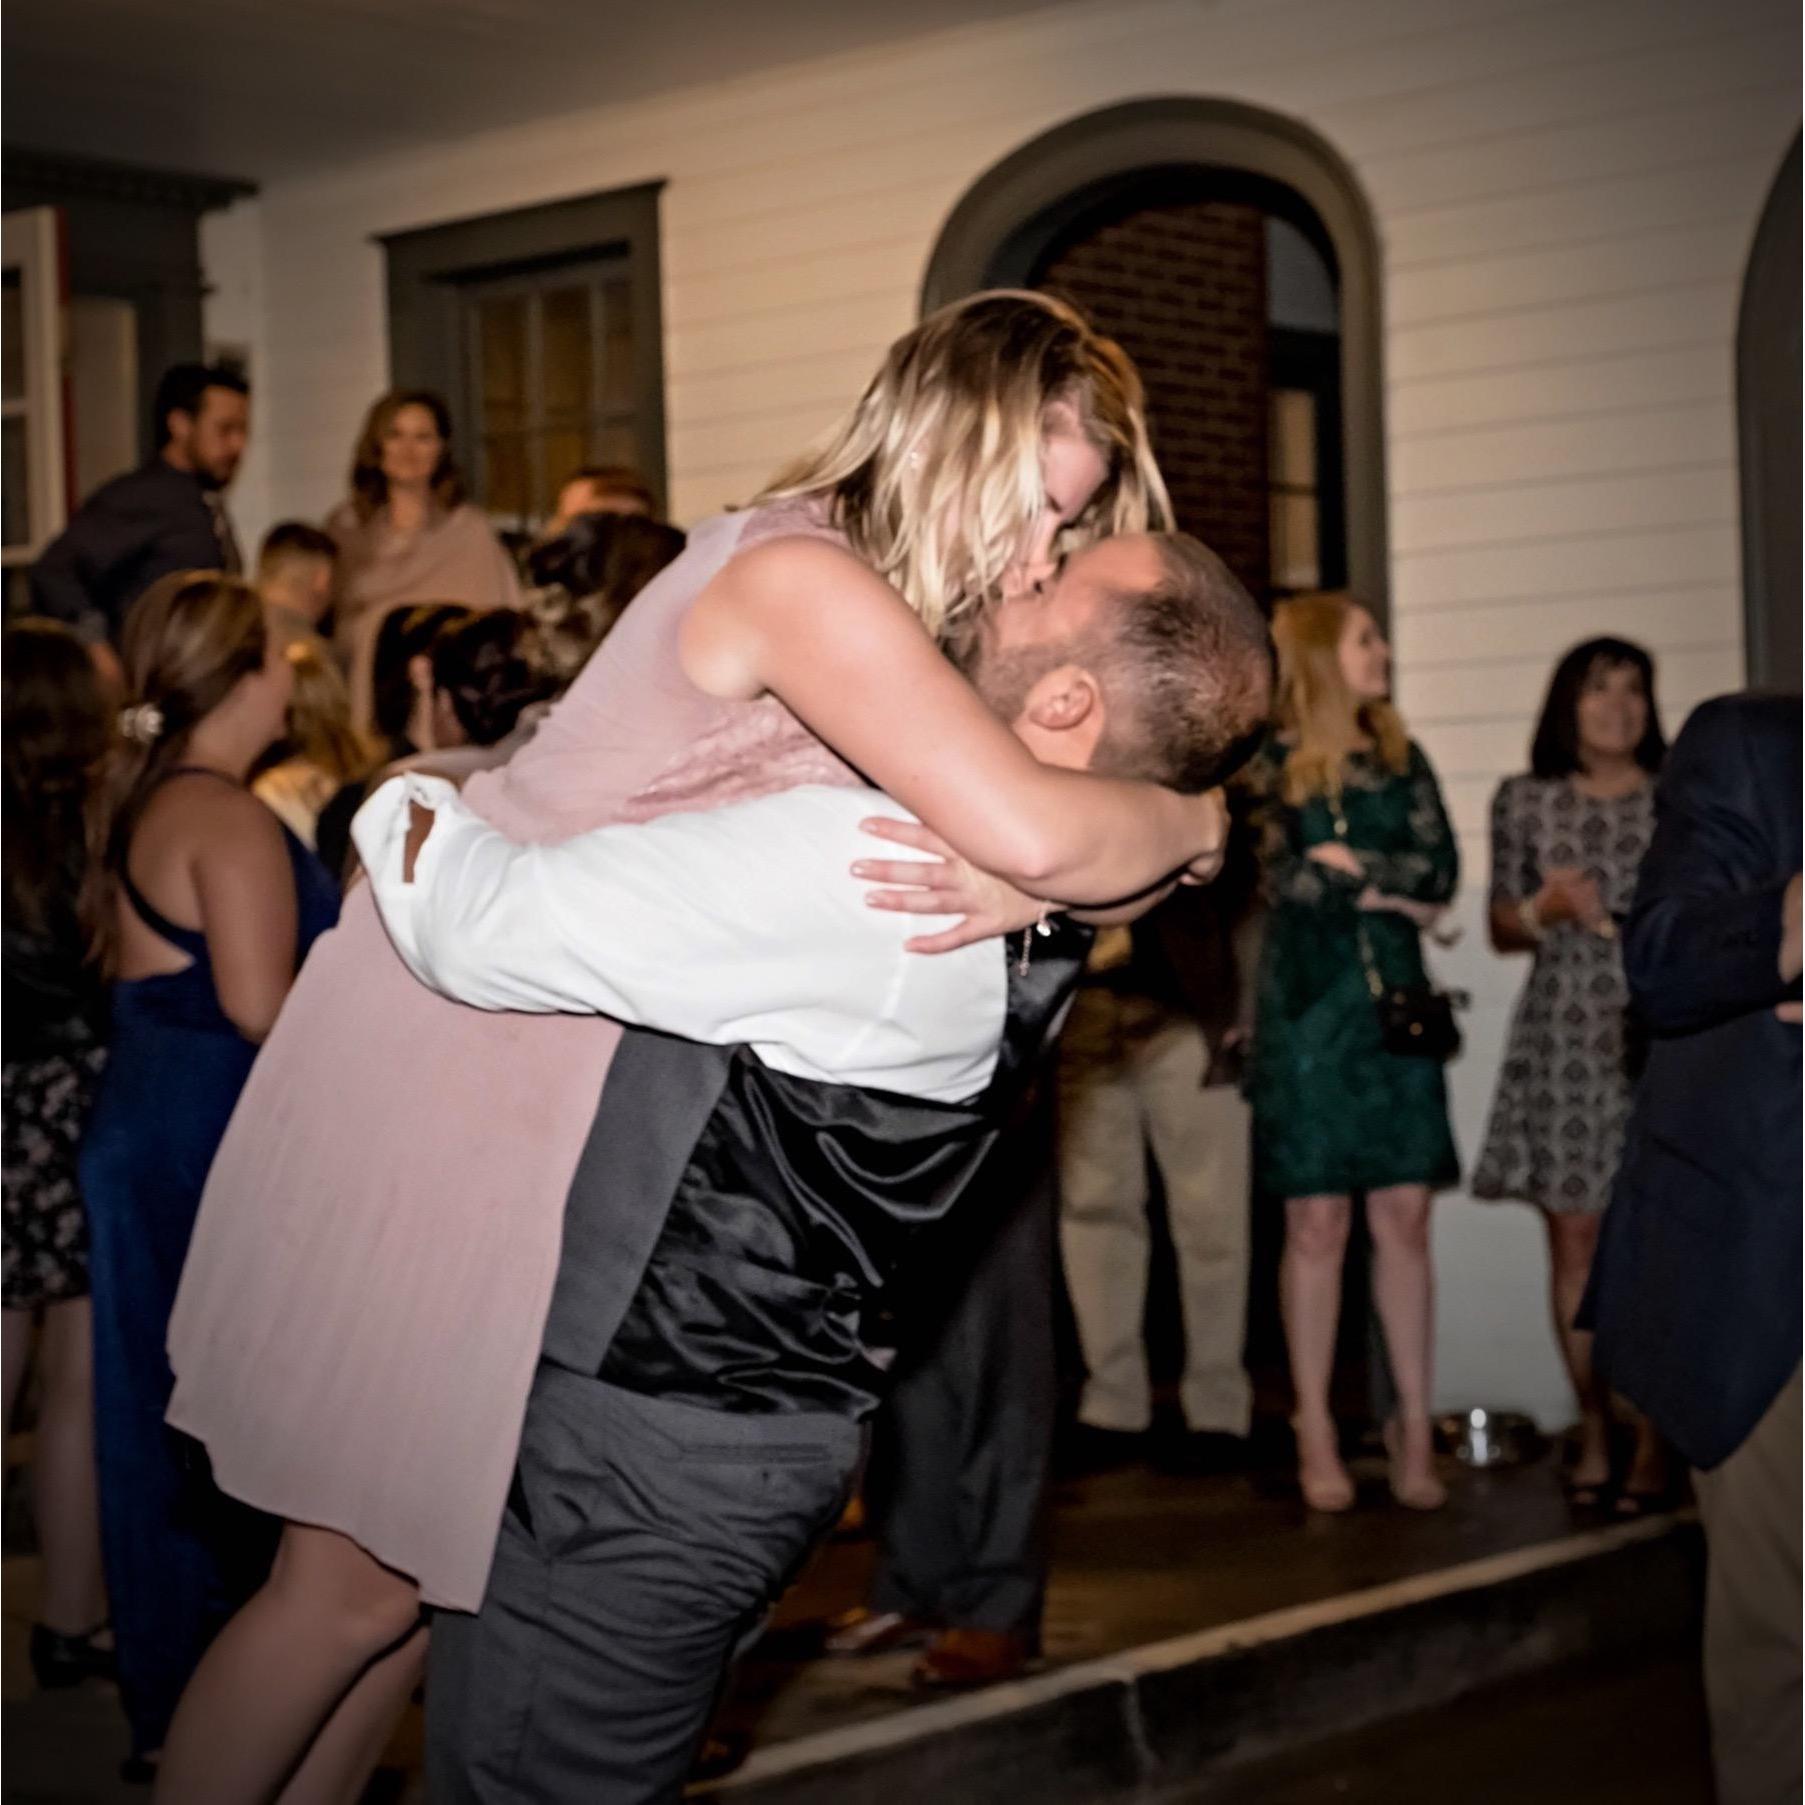 This photo was captured right after we sent Stephanie and Cory off as newly weds. We couldn't help but feel the love as well.